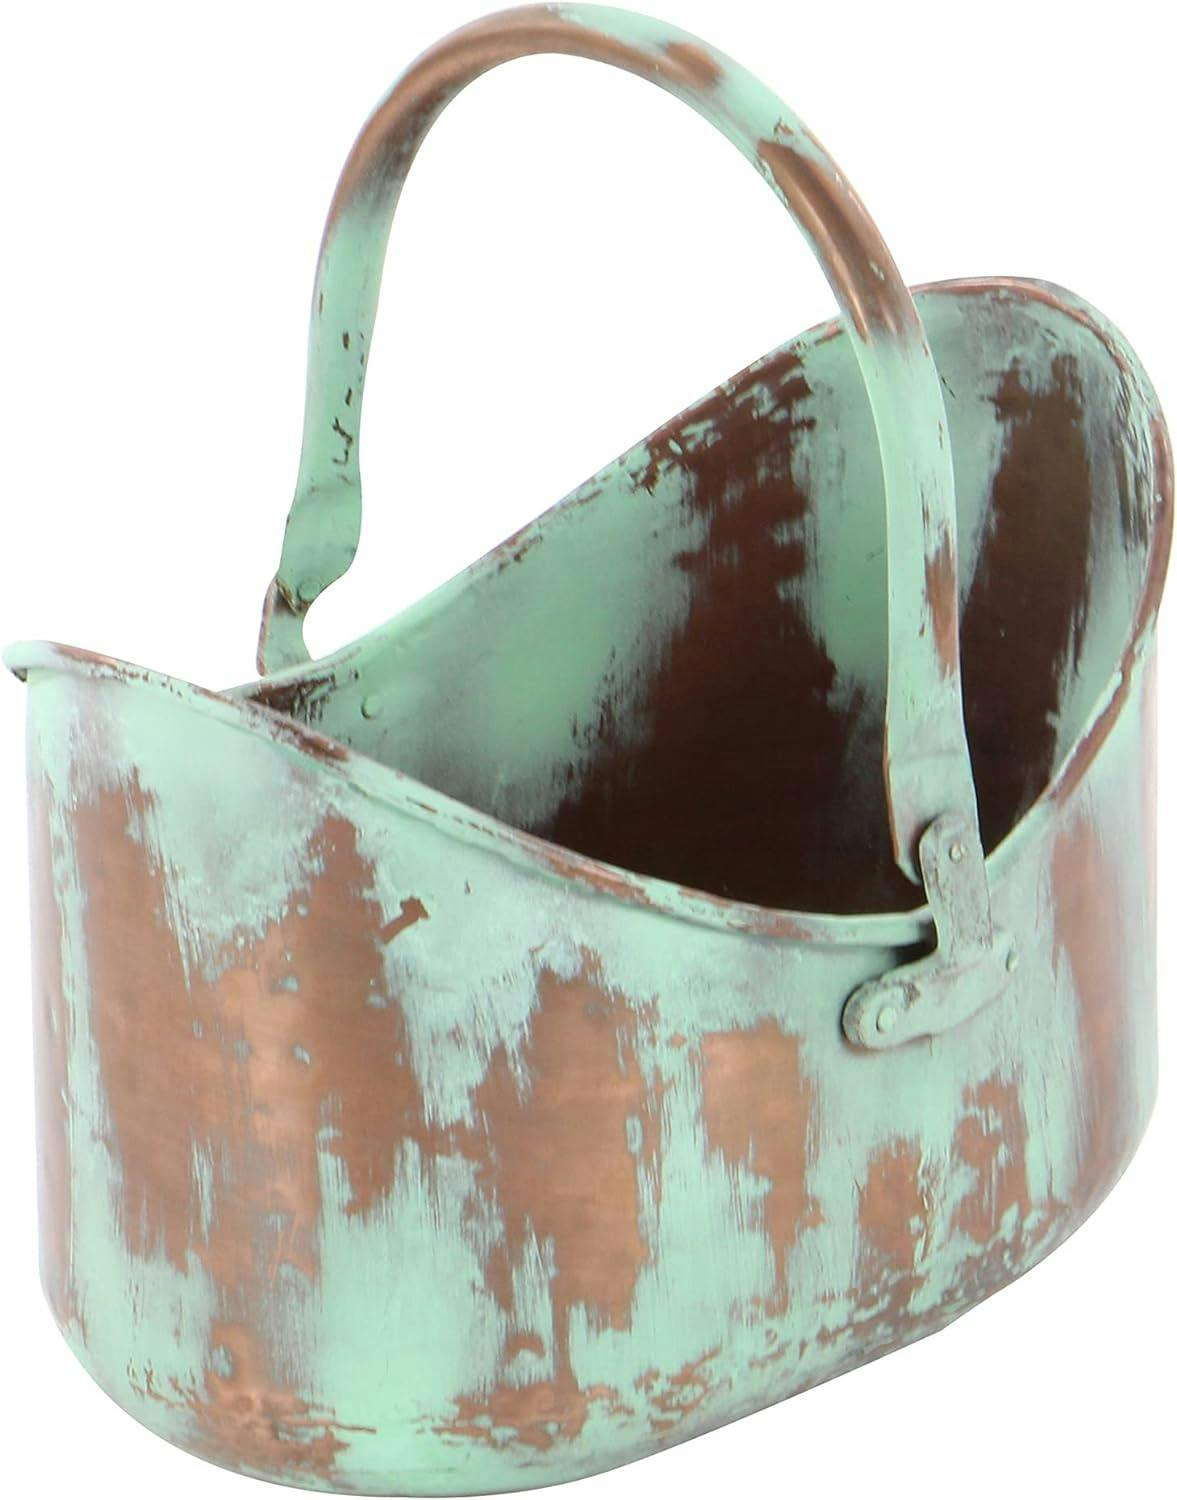 Patina Tulip Copper Metal Planter Set of 3 with Handles